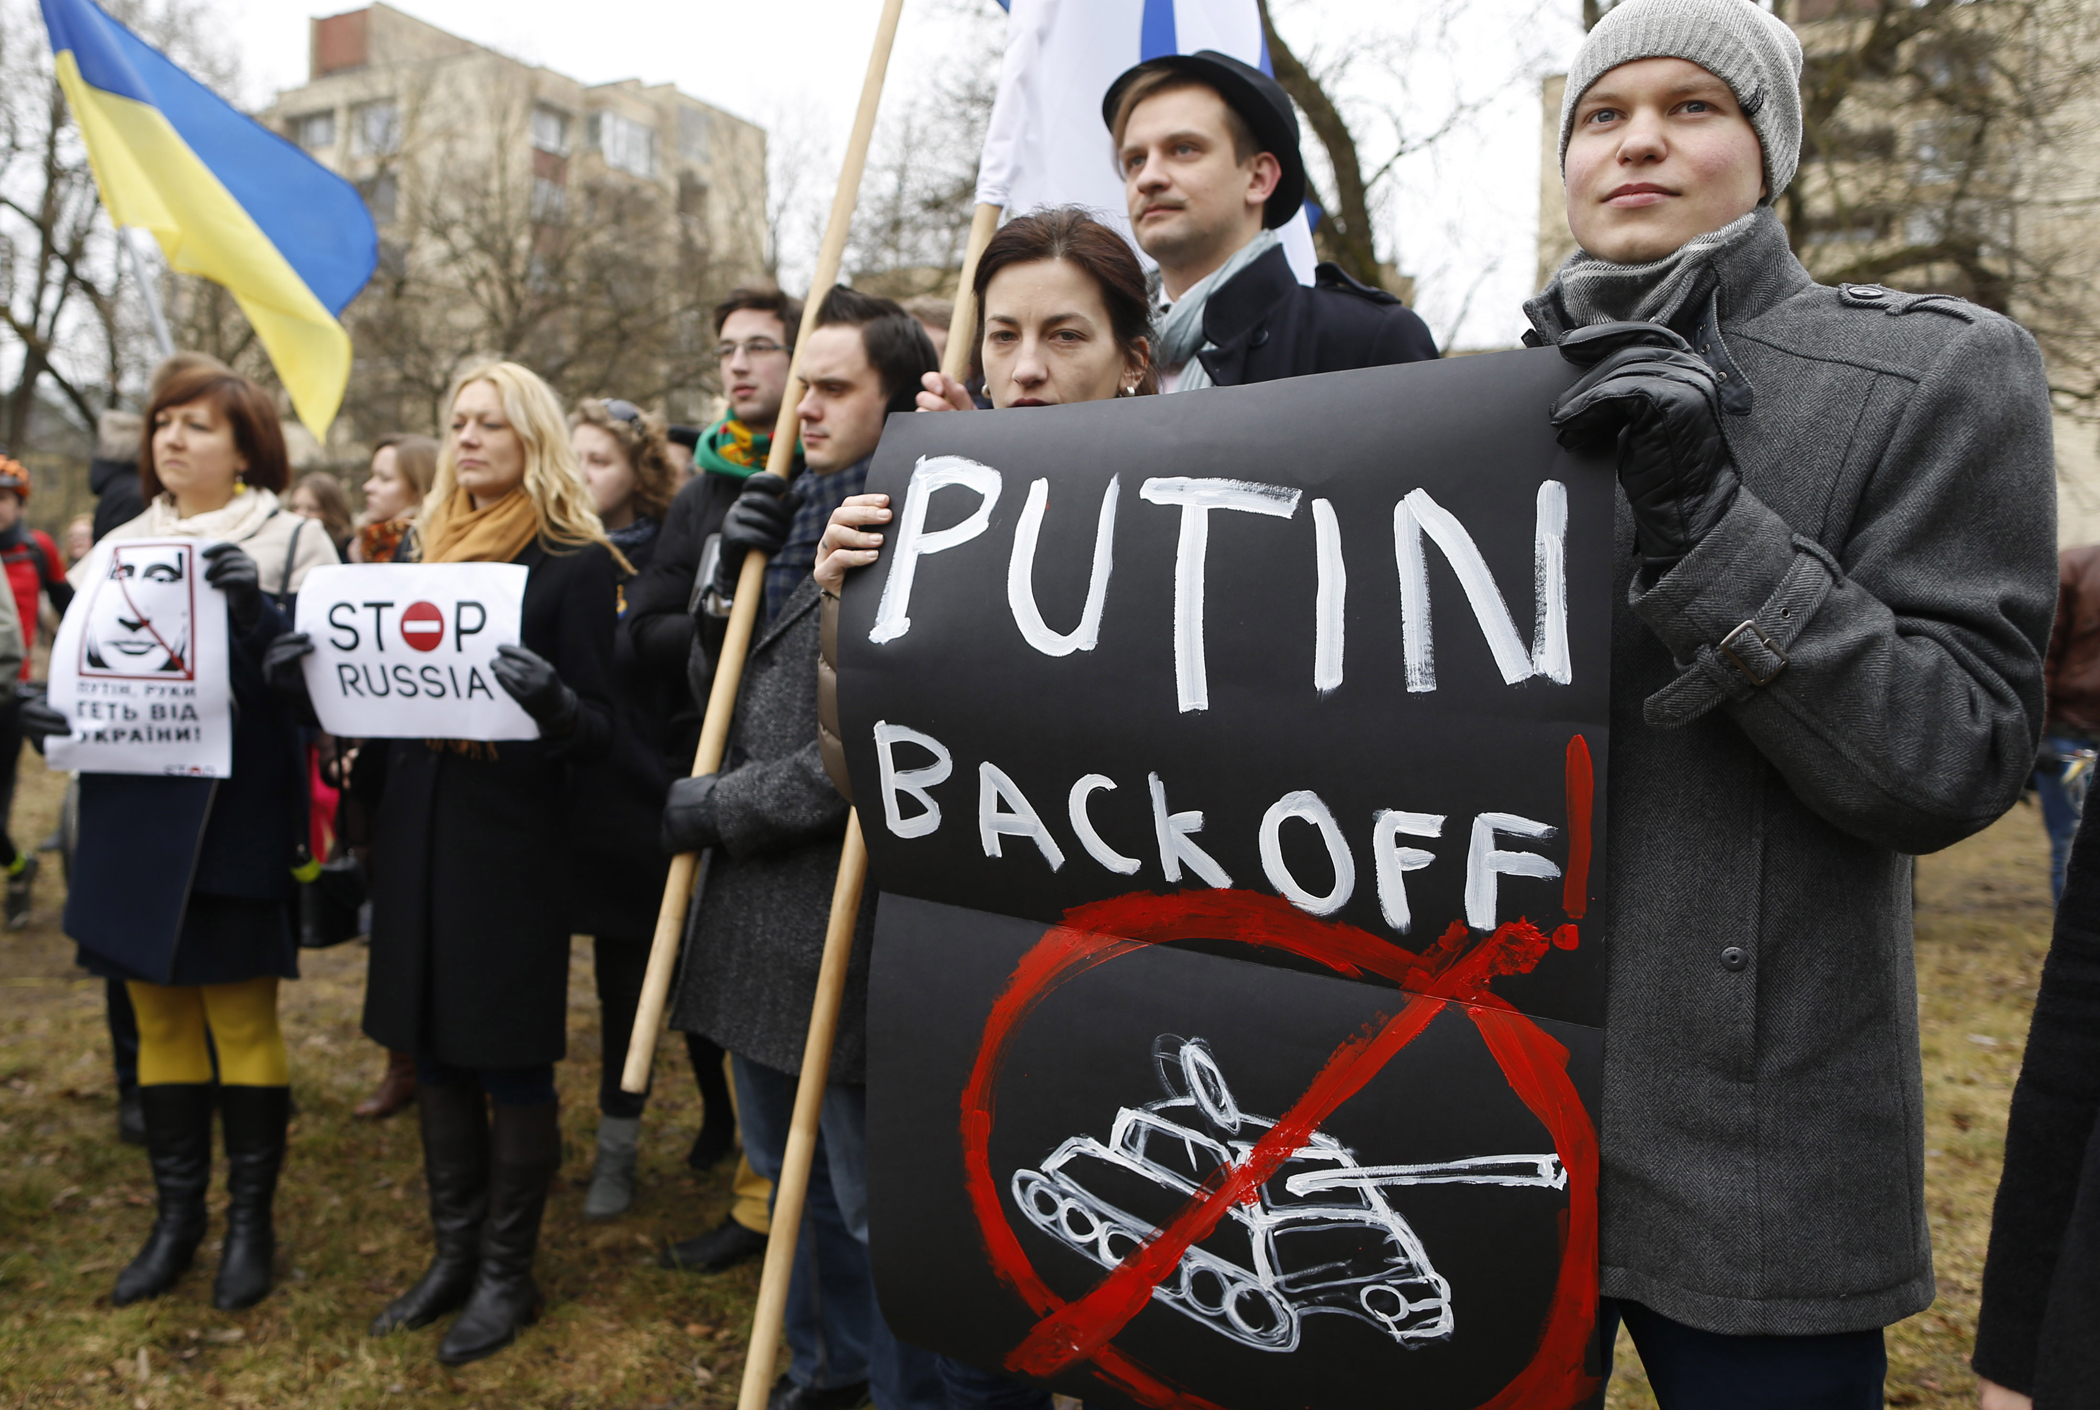 Demonstrators gather outside the Russian Embassy in Vilnius, Lithuania, to protest against Russian intervention in Ukraine, in March 2014.